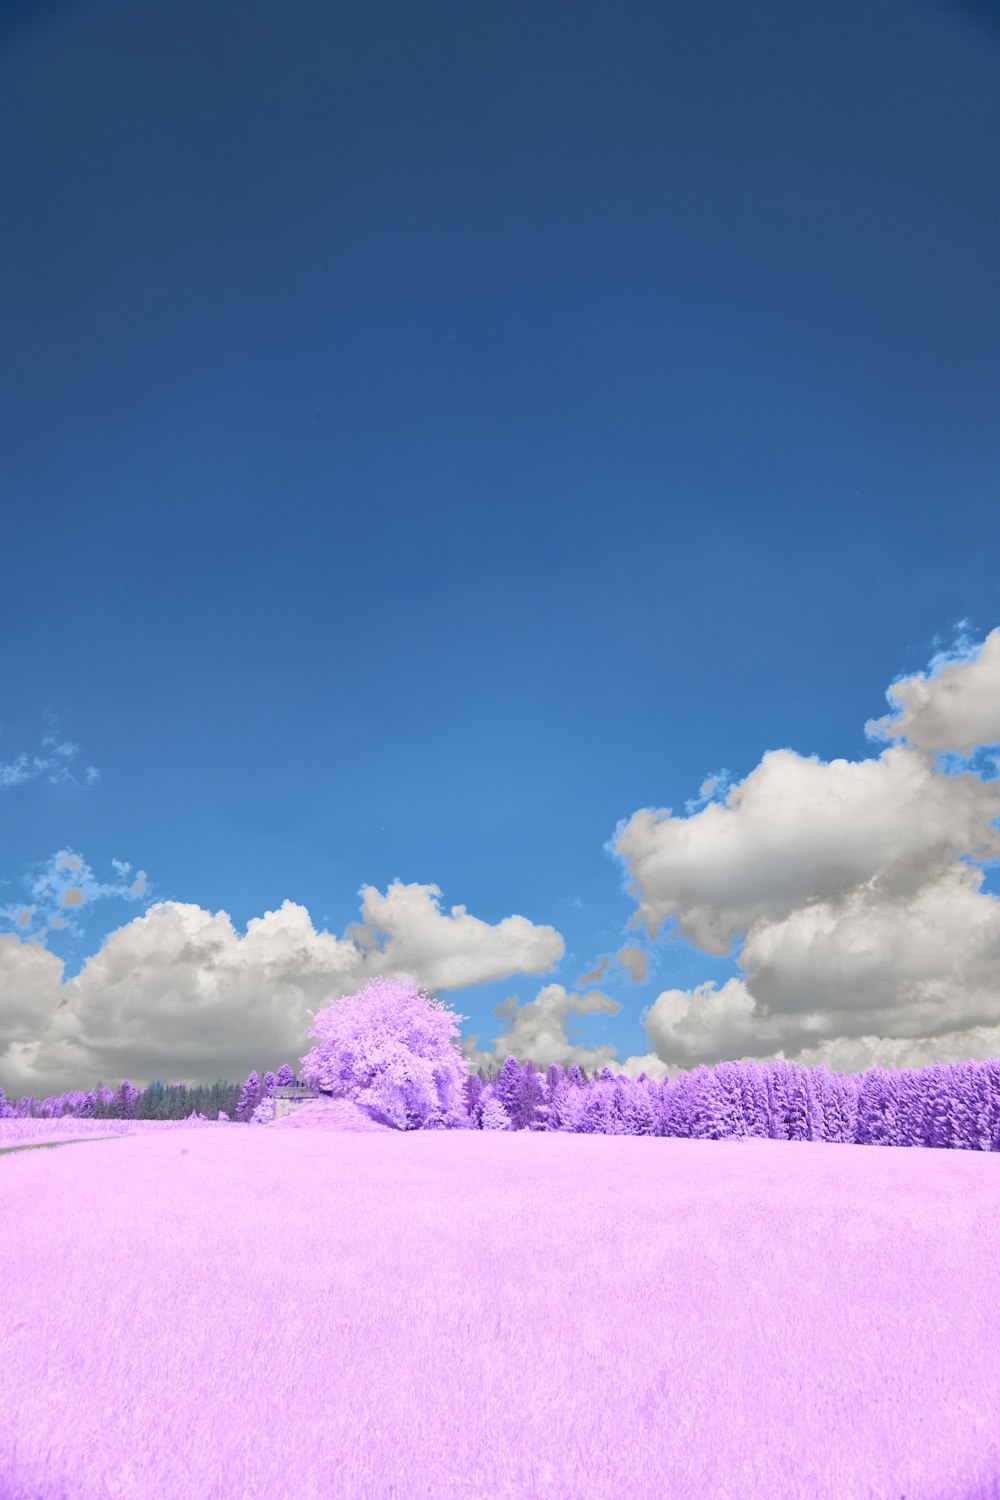 a purple field with trees and clouds in the background